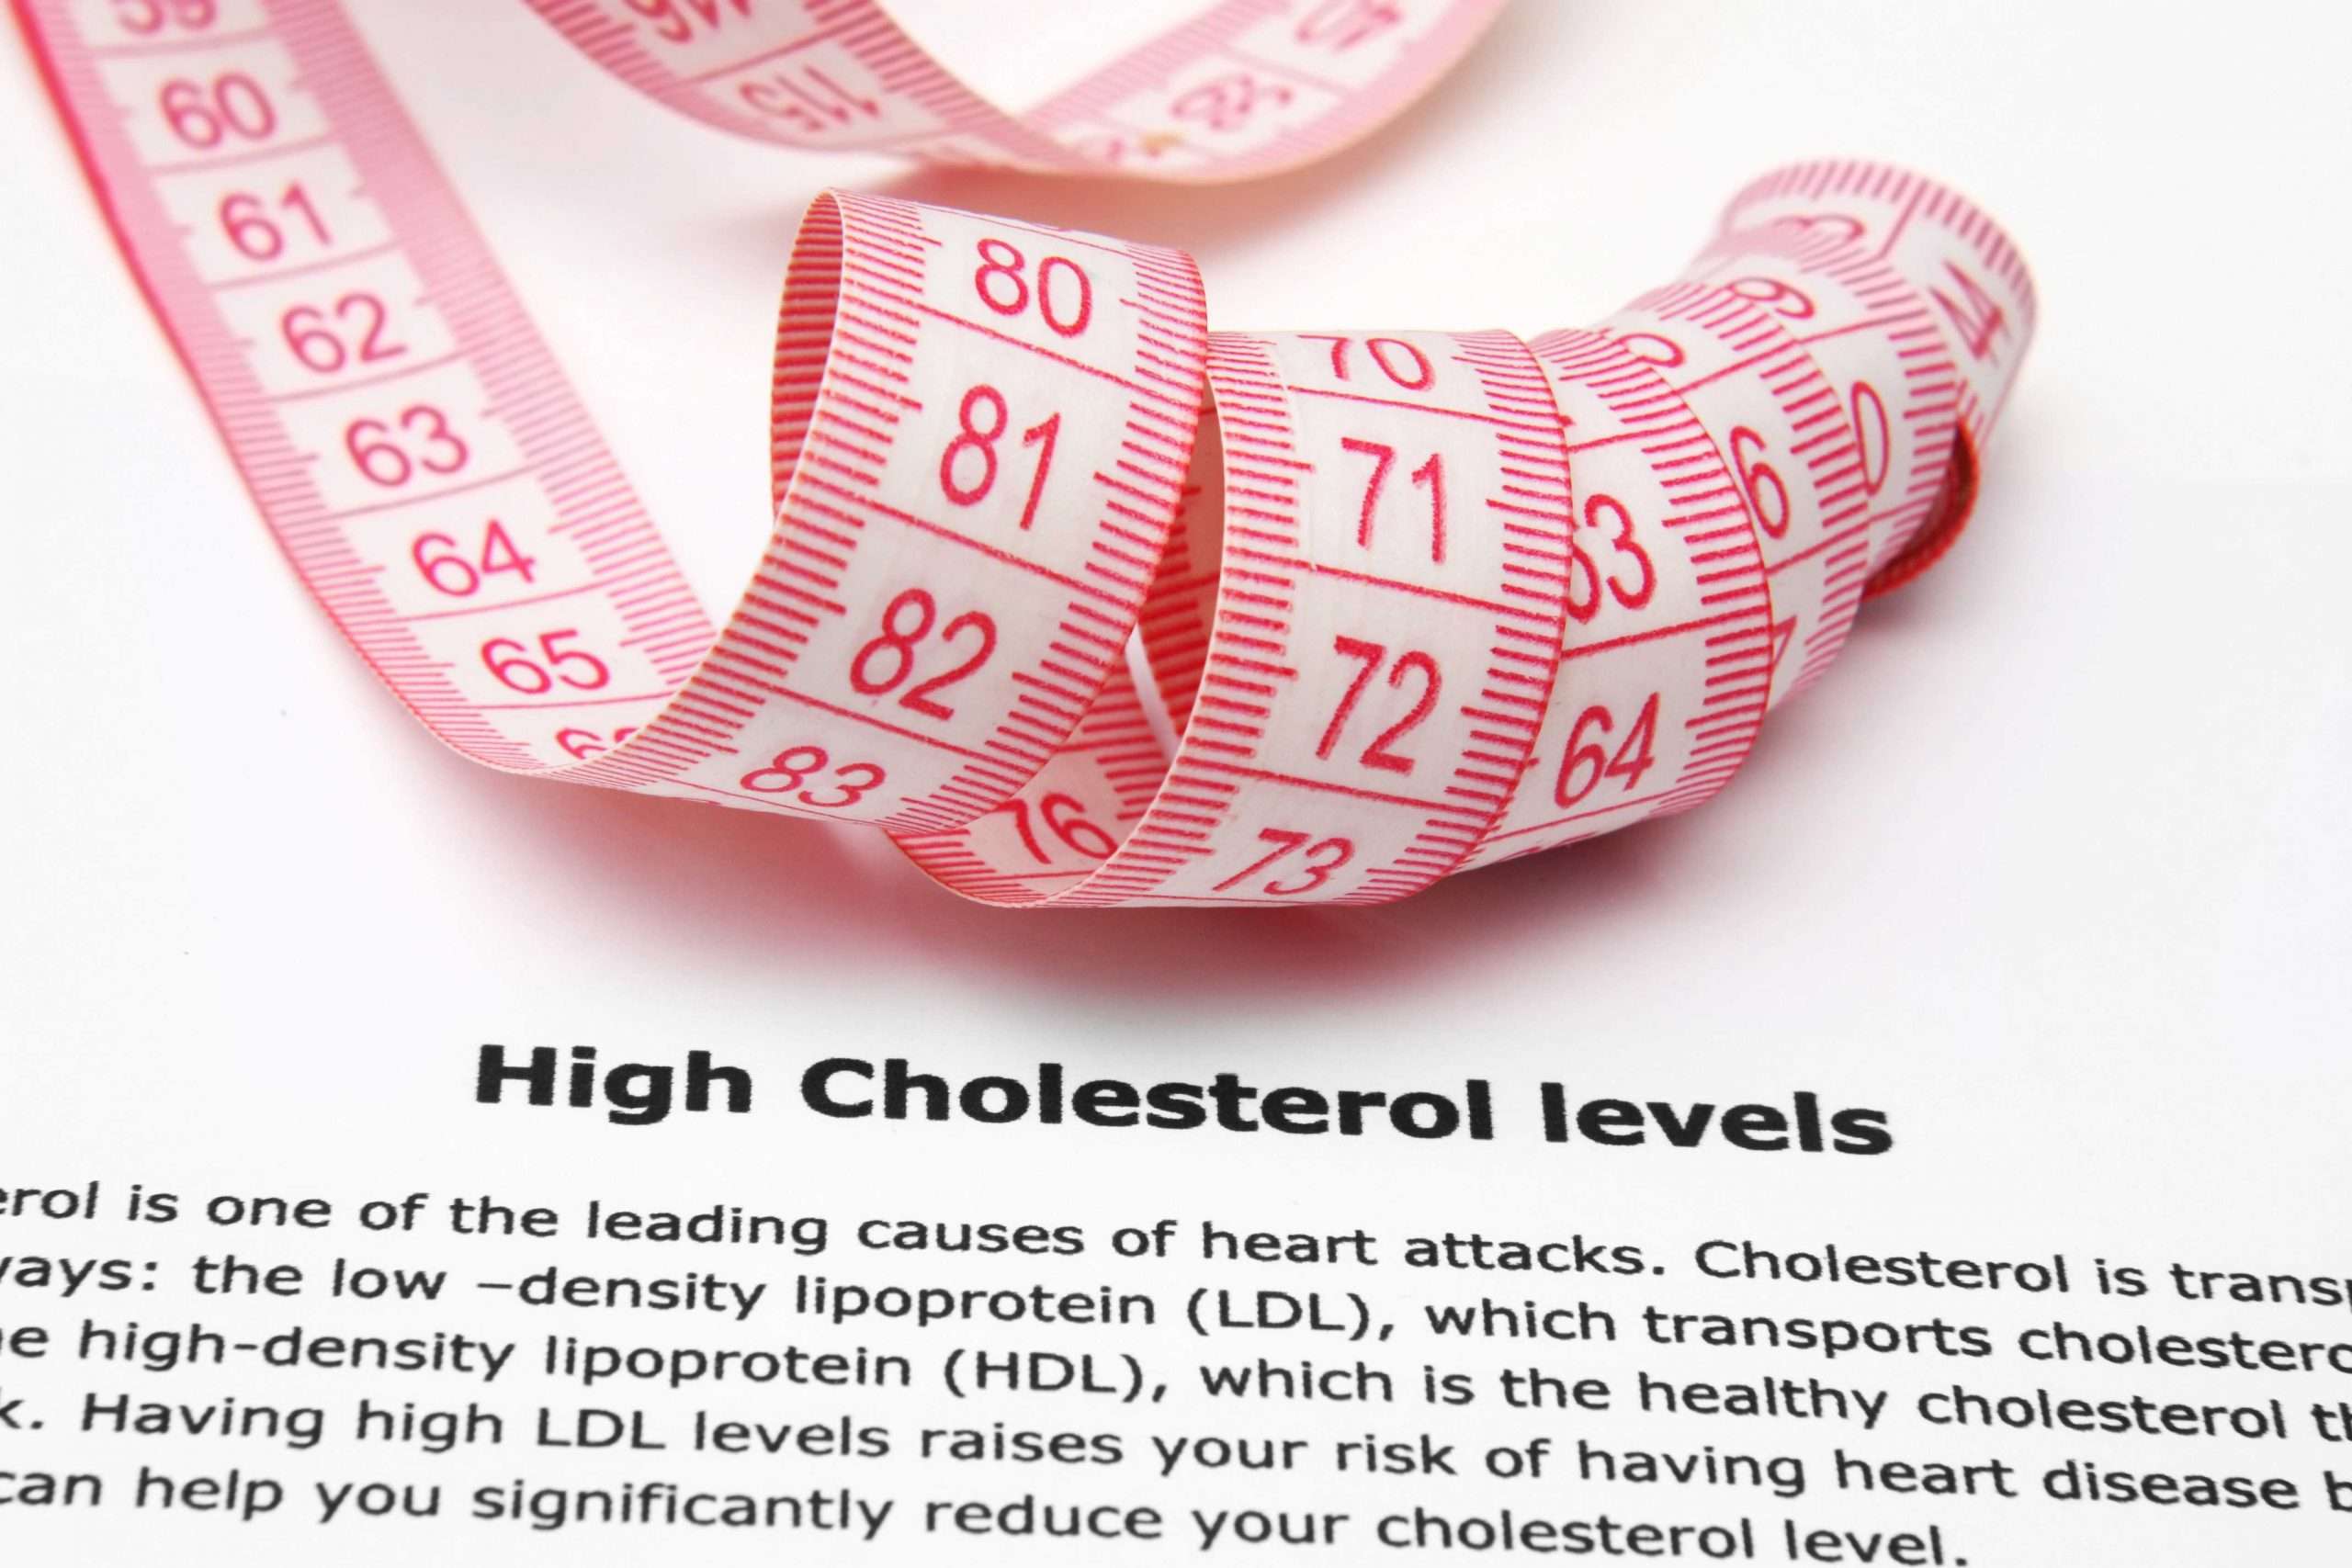 How to Know If You Have High Cholesterol